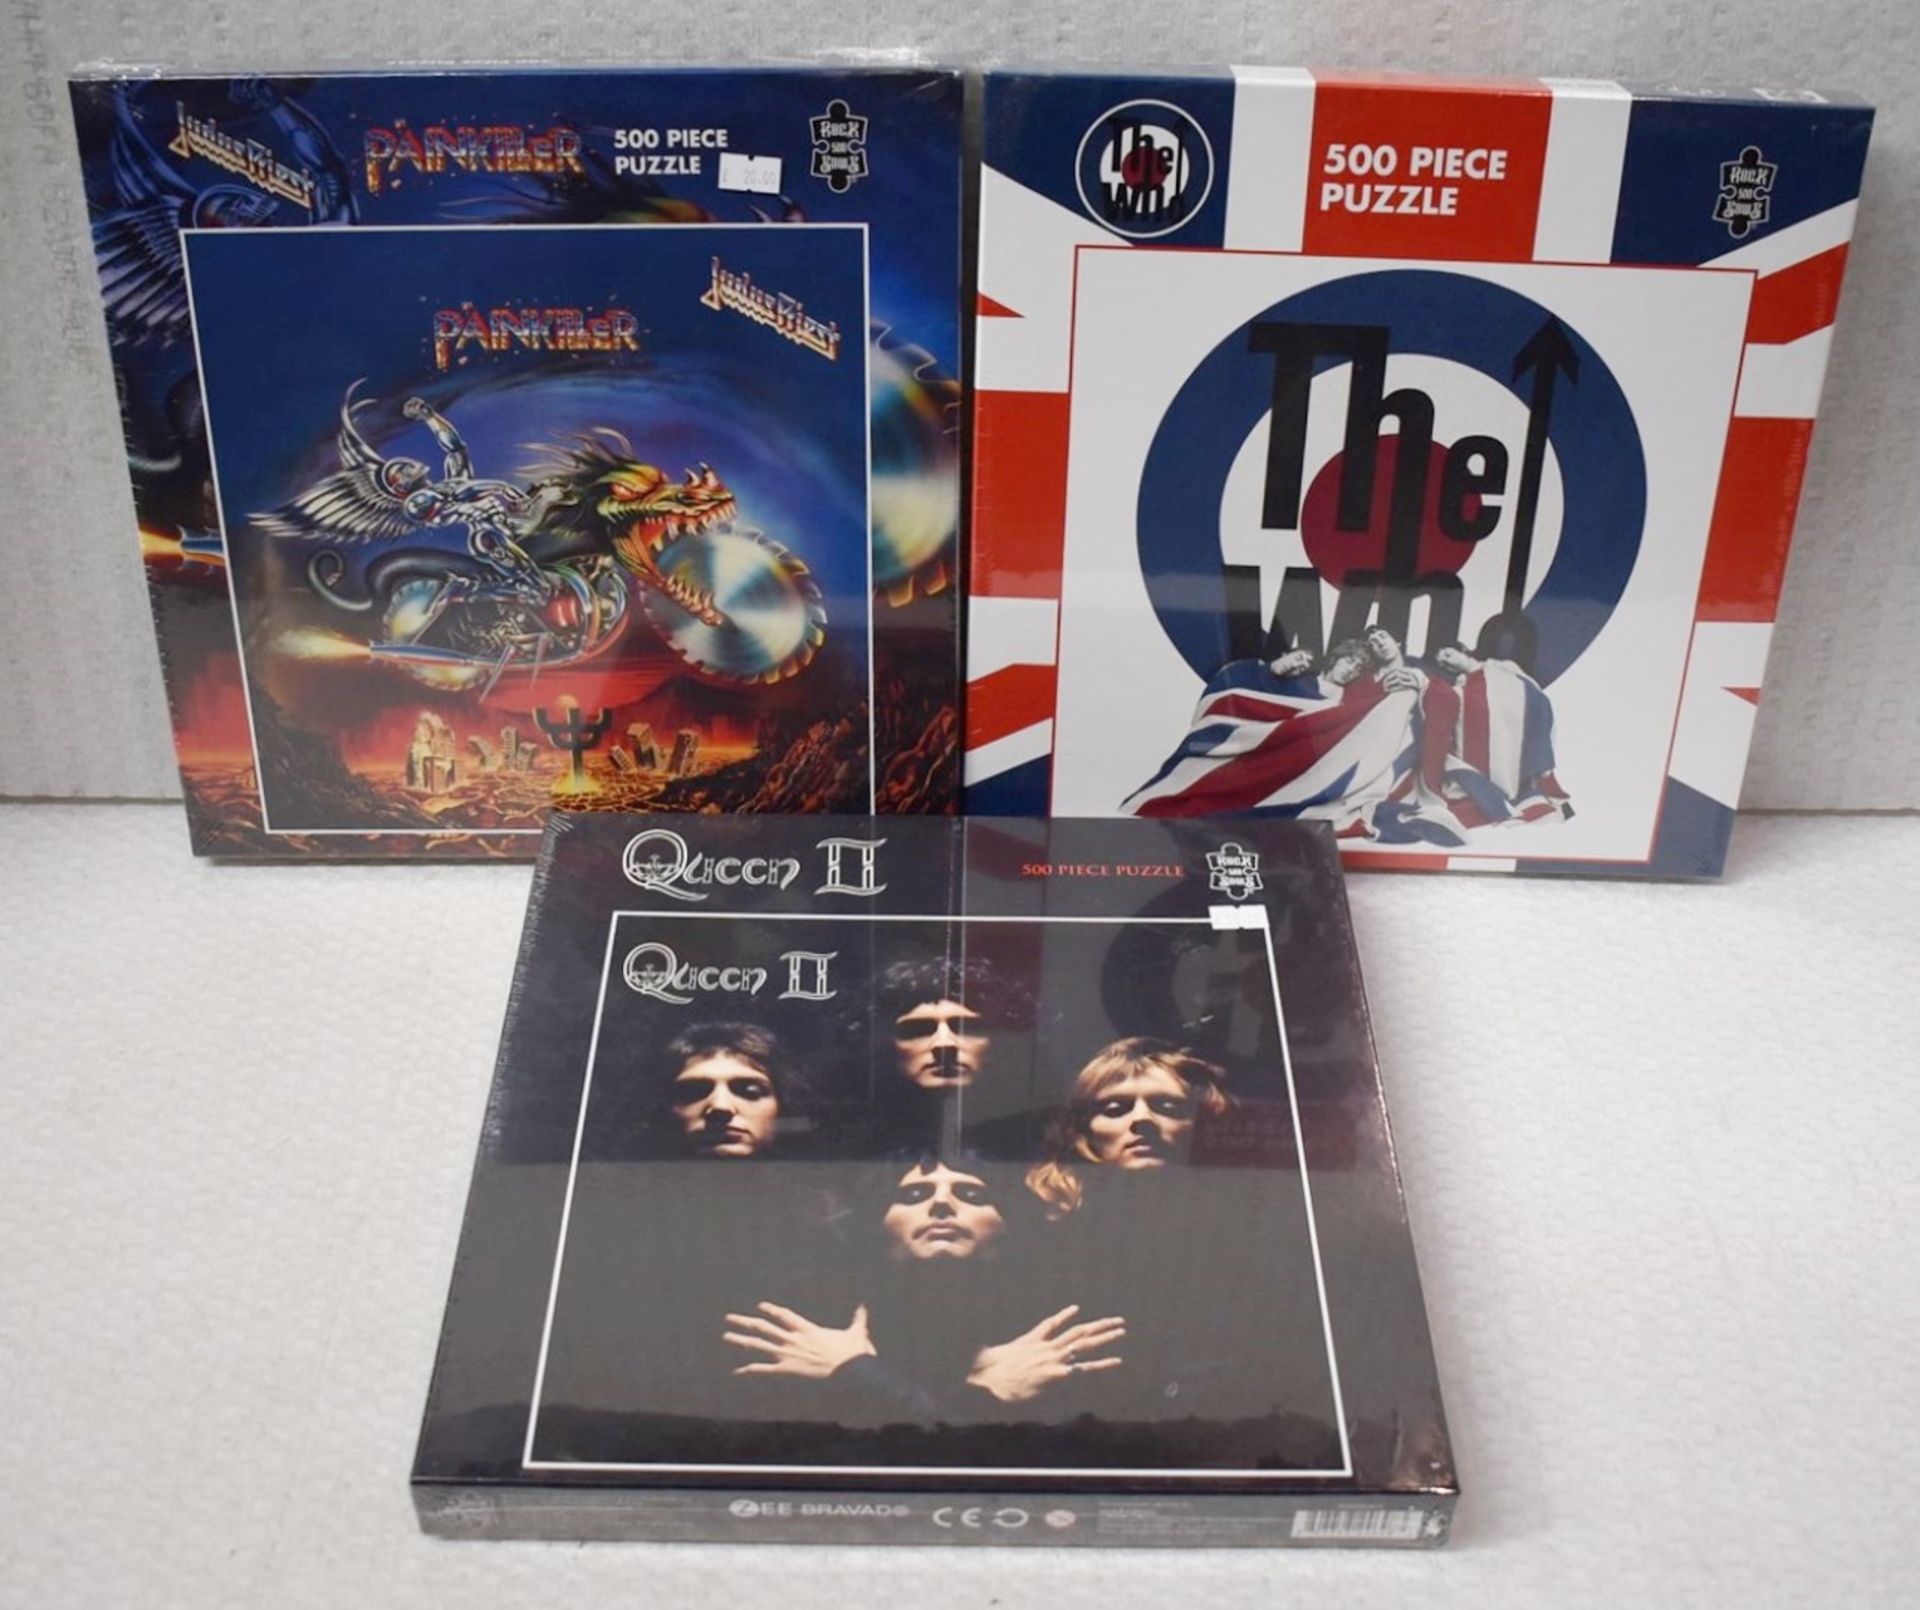 3 x 500 Piece Jigsaws By Rock Saws - Includes Judas Priest, Queen & The Who - Officially Licensed